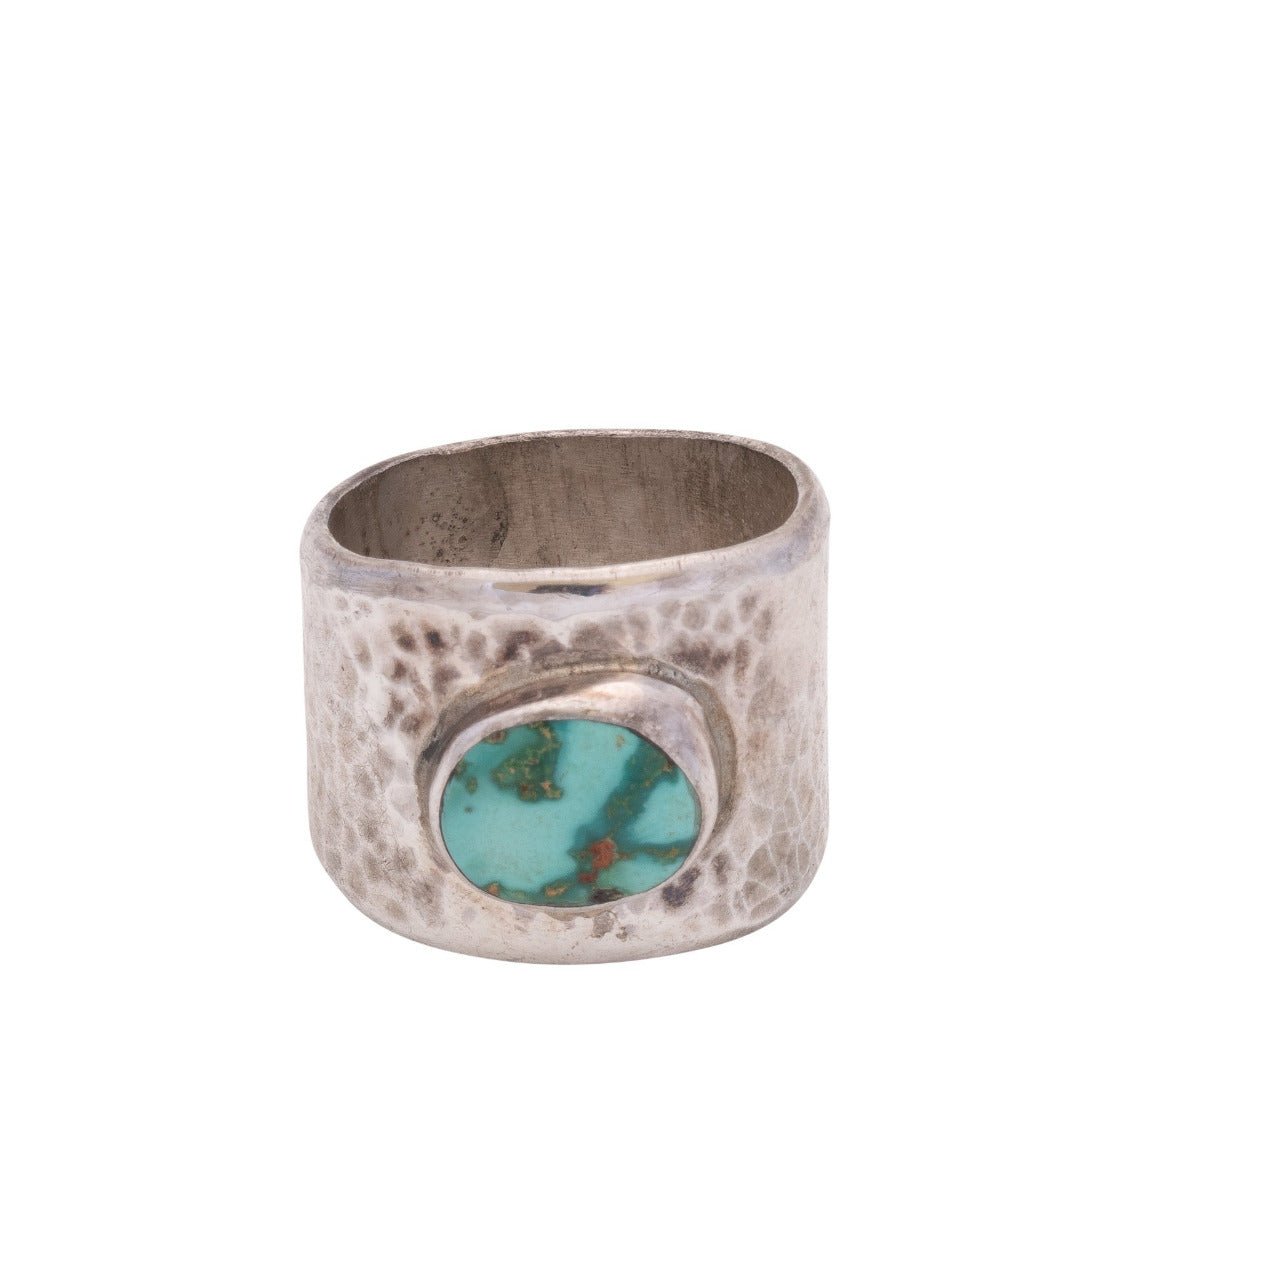 Hand Hammered Sterling Silver and Turquoise Ring By Brett Bastien - Turquoise & Tufa